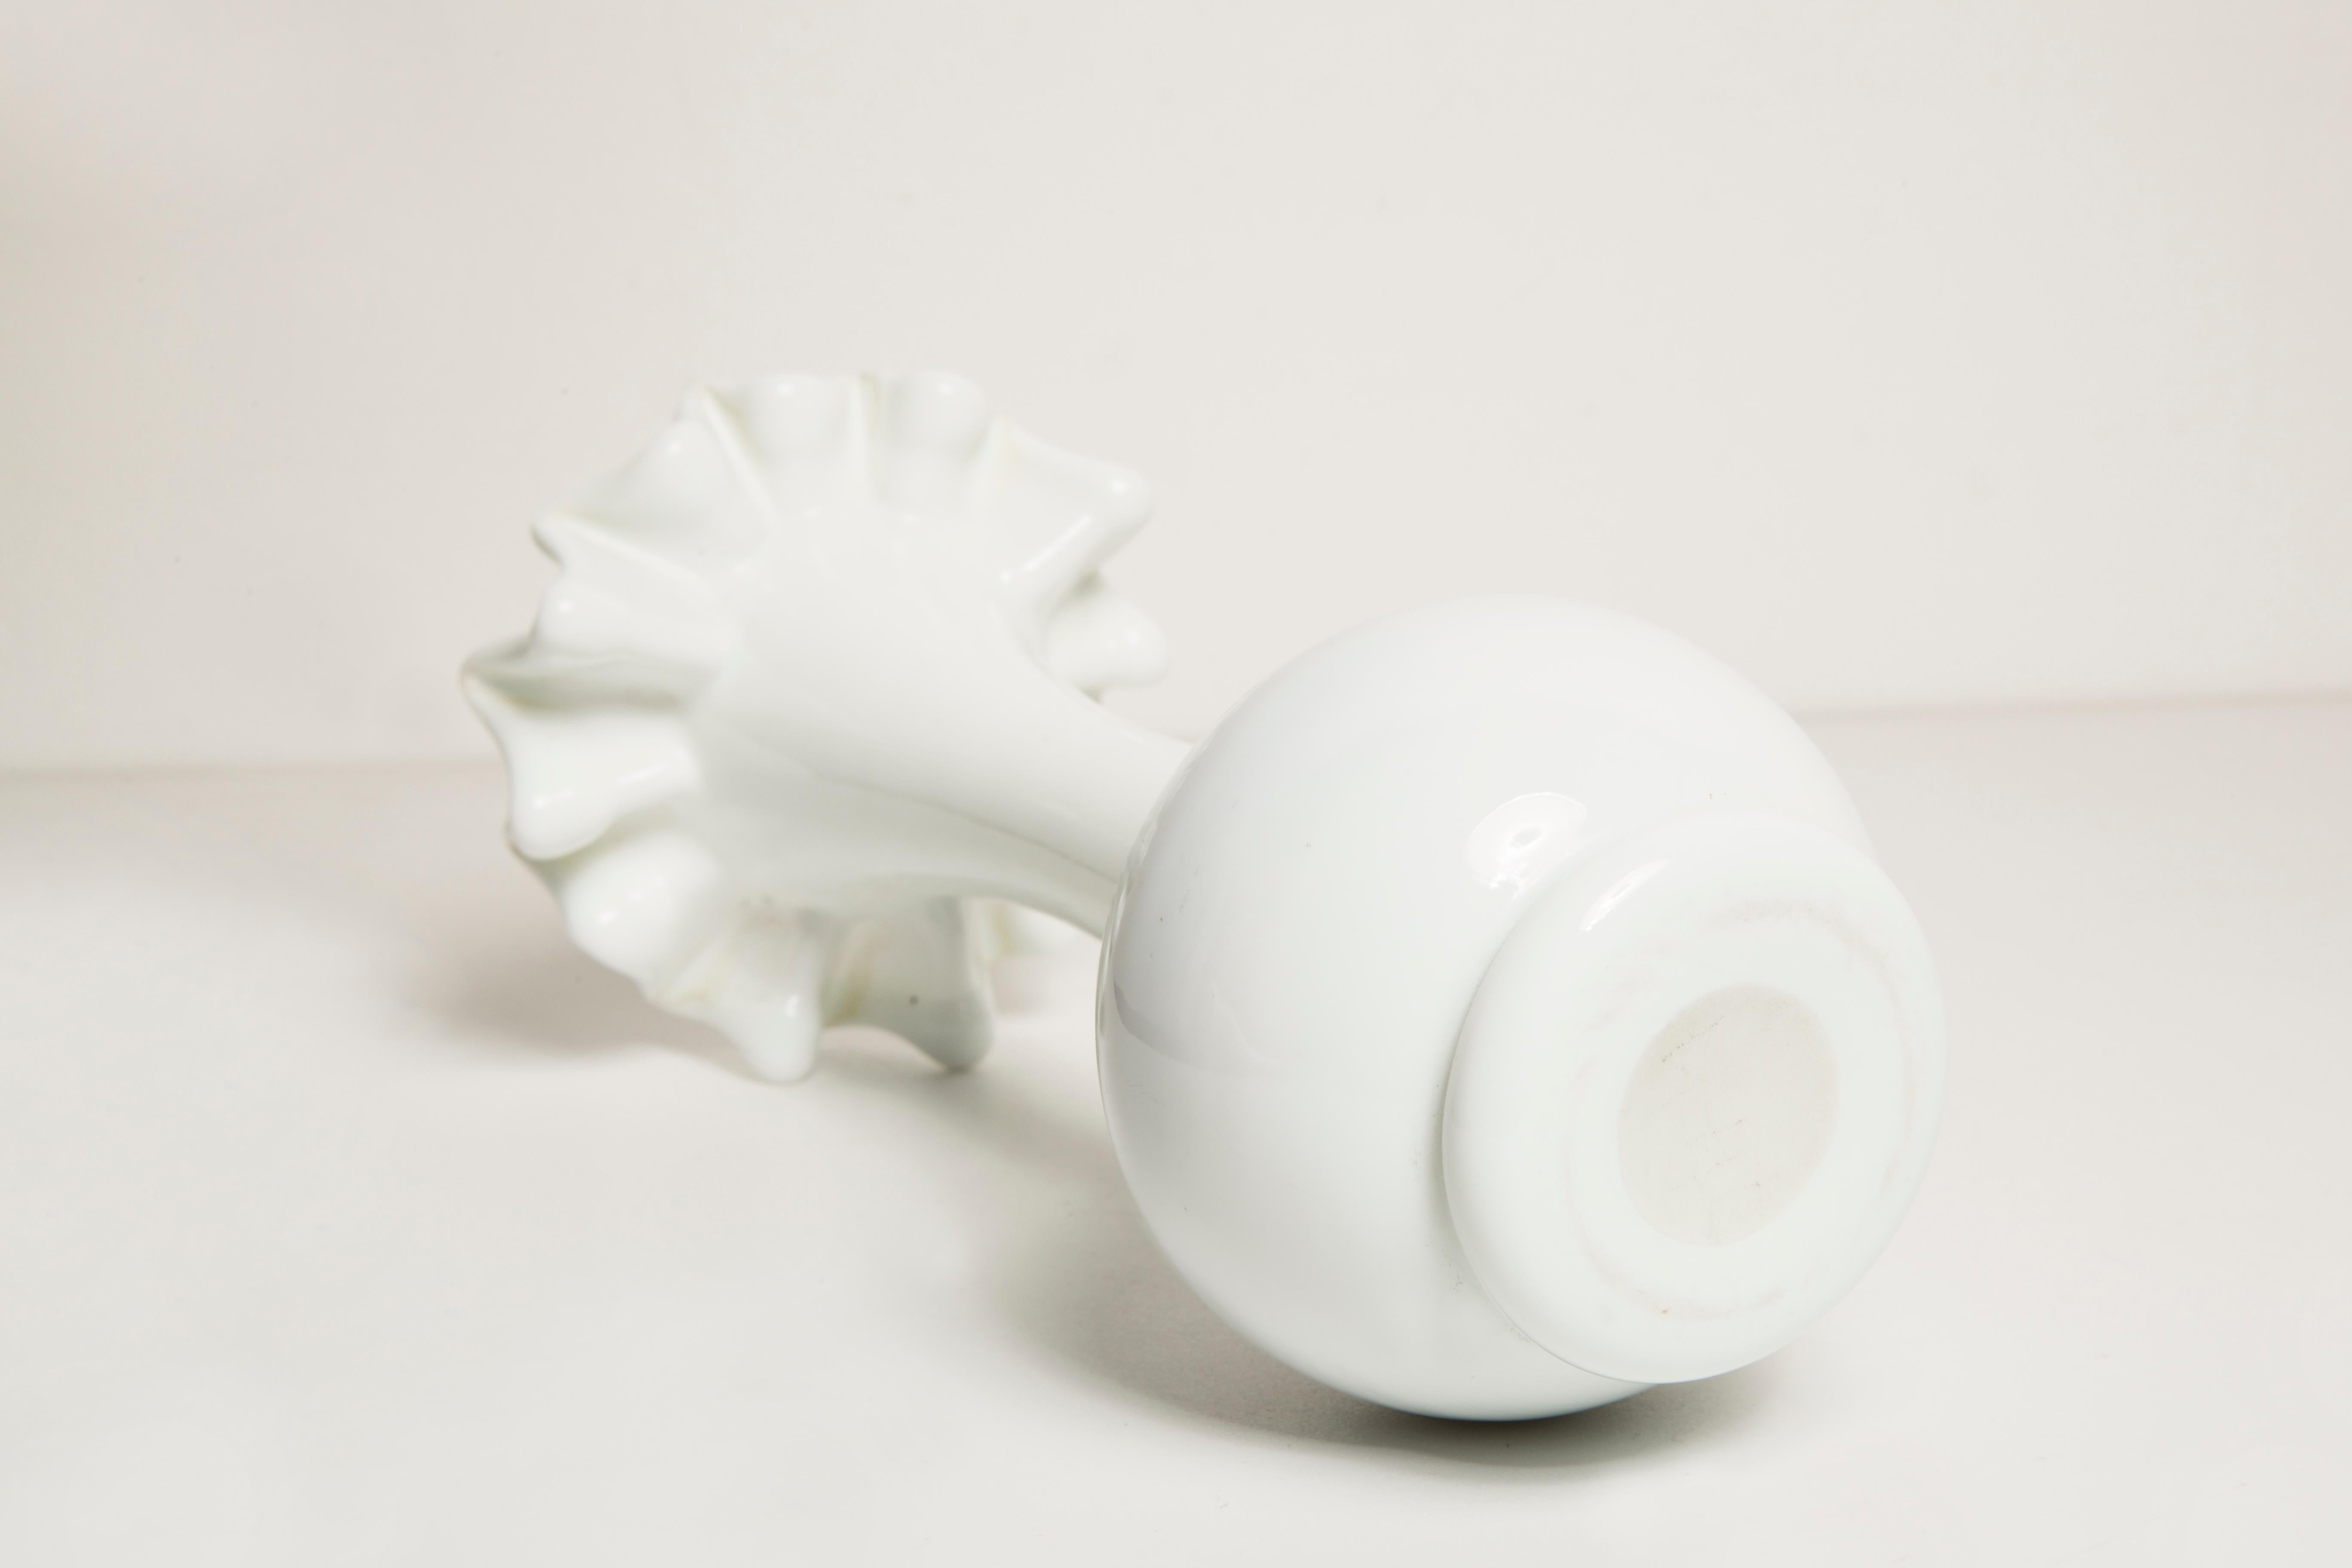 Midcentury Porcelain White Mini Vase with a Frill, Europe, 1960s For Sale 2